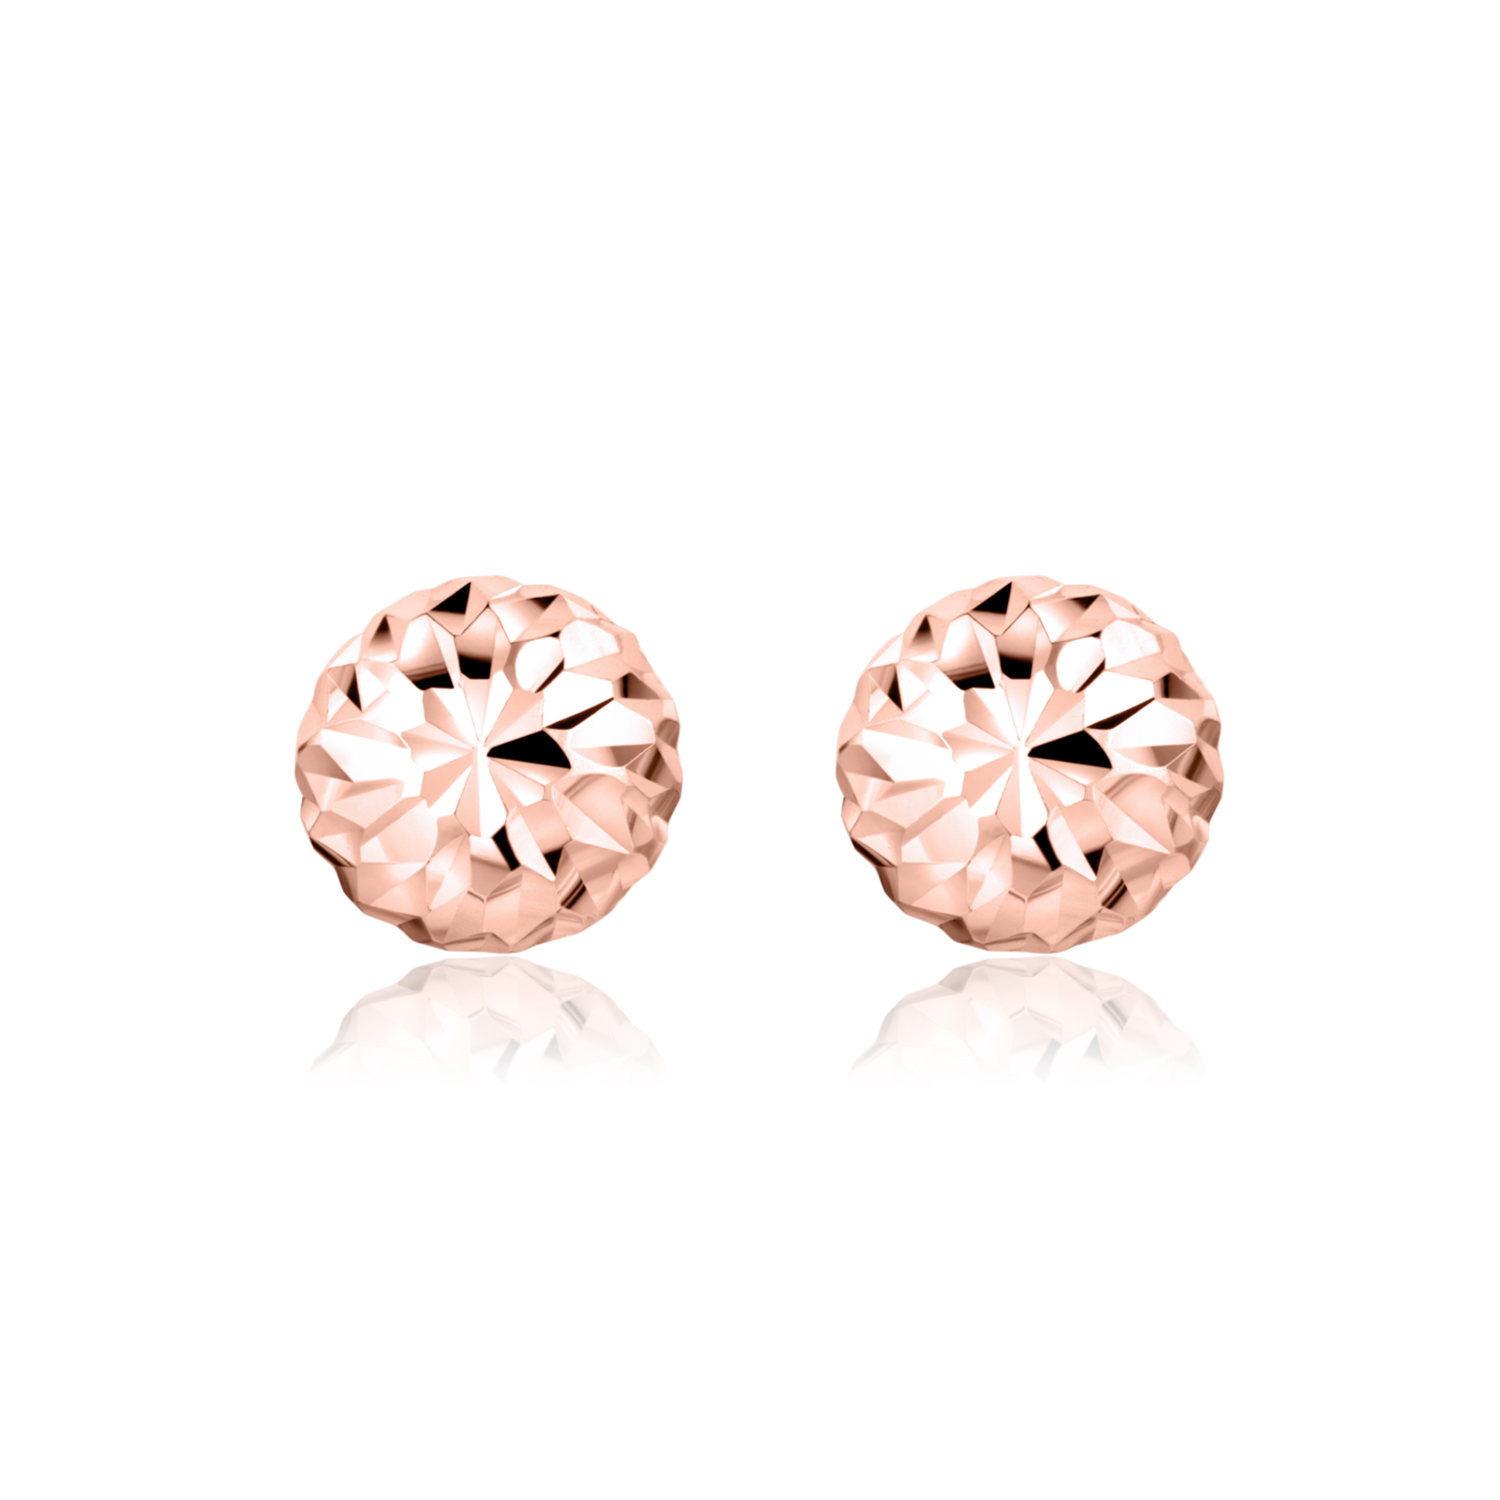 9ct Rose Gold 2.5x20mm Polished Hoop Earrings | Prouds-sgquangbinhtourist.com.vn